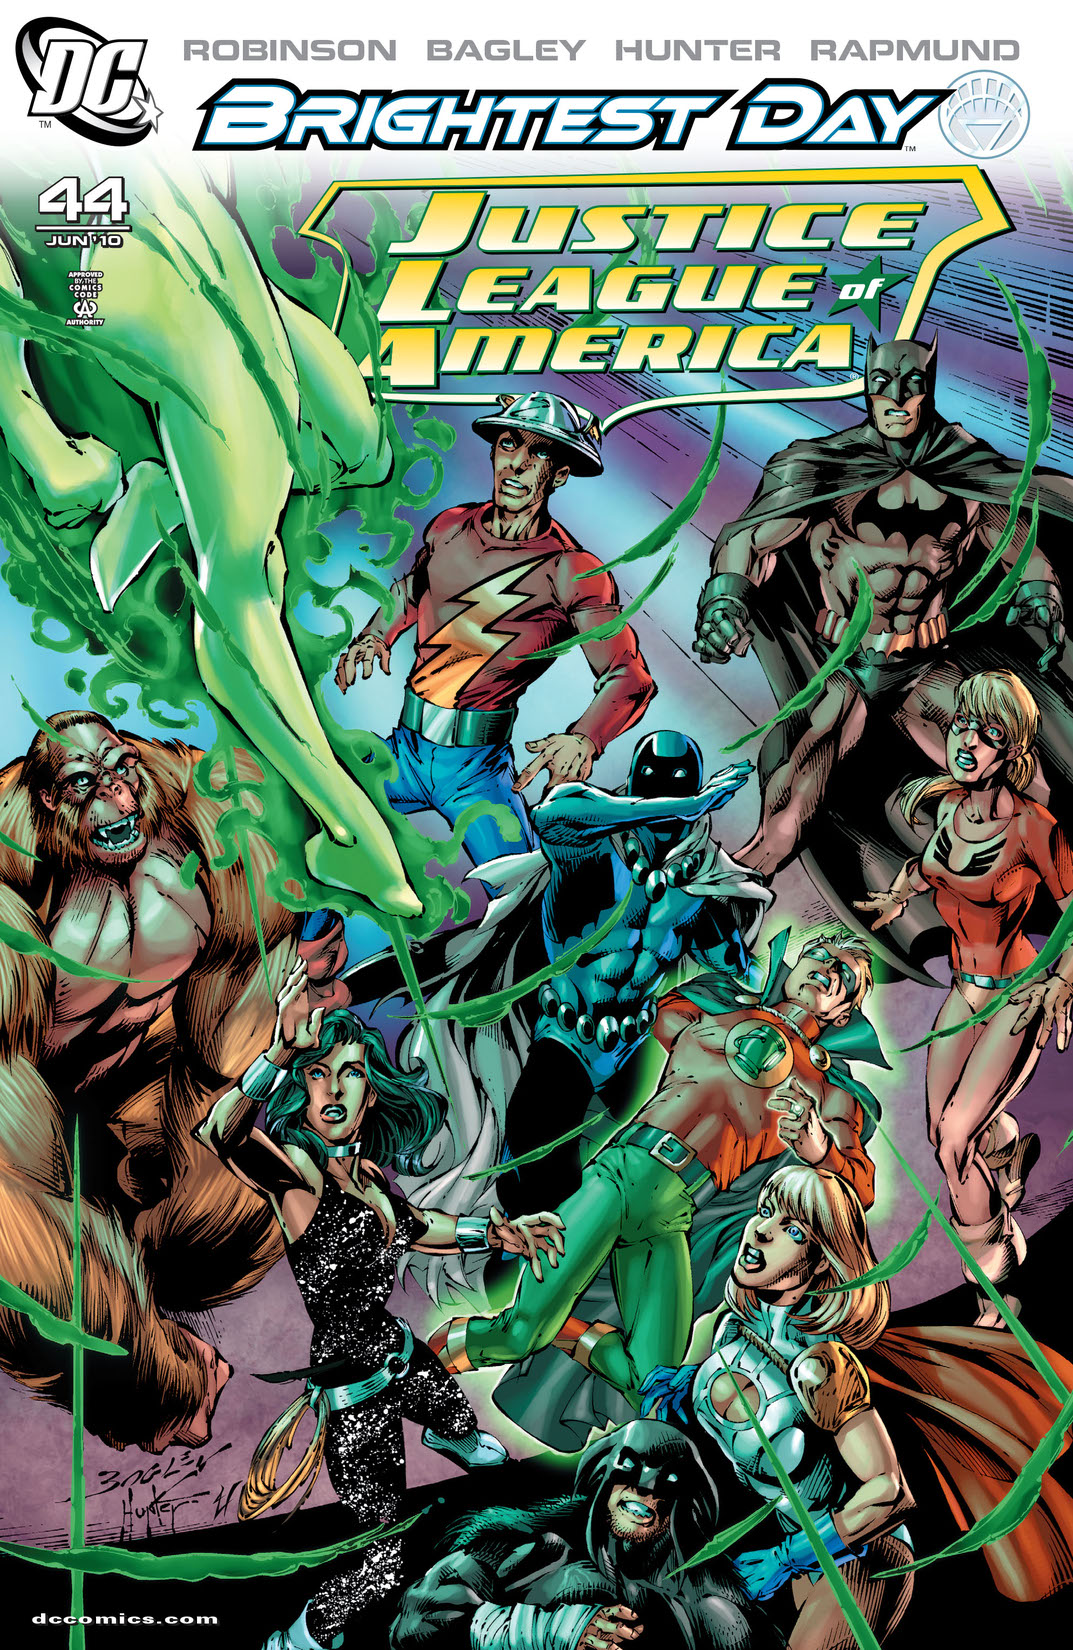 Justice League of America (2006-) #44 preview images